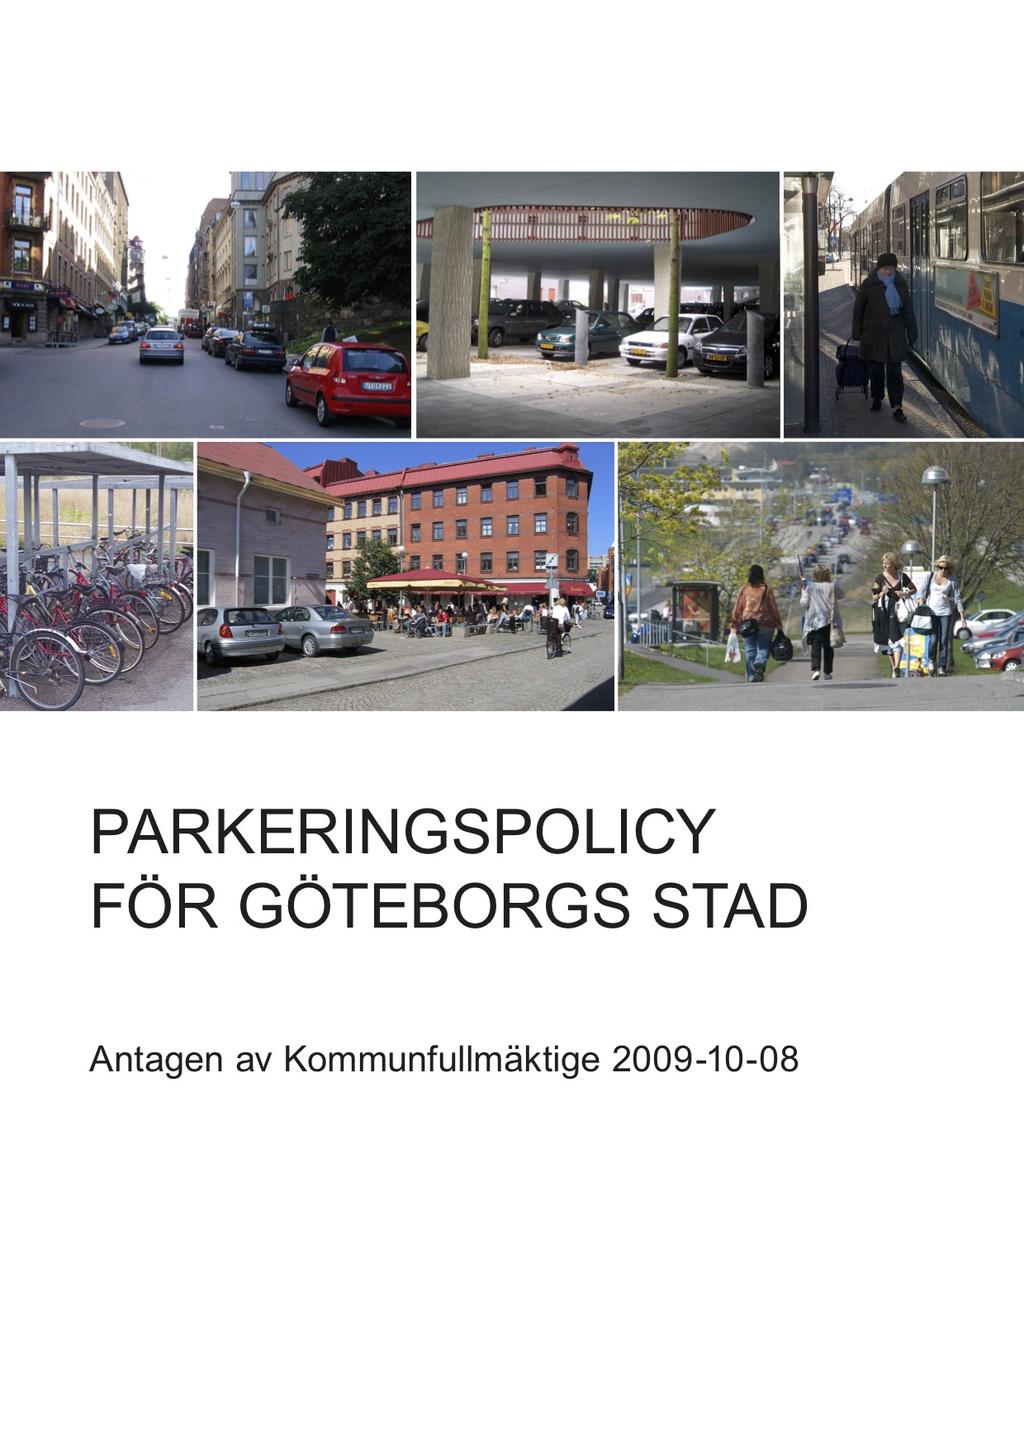 behavioural measures (För liv och rörelse, 2018). There further exist planning documents for cycling parking for planners and for property owners (Cyelparkering, 2018).